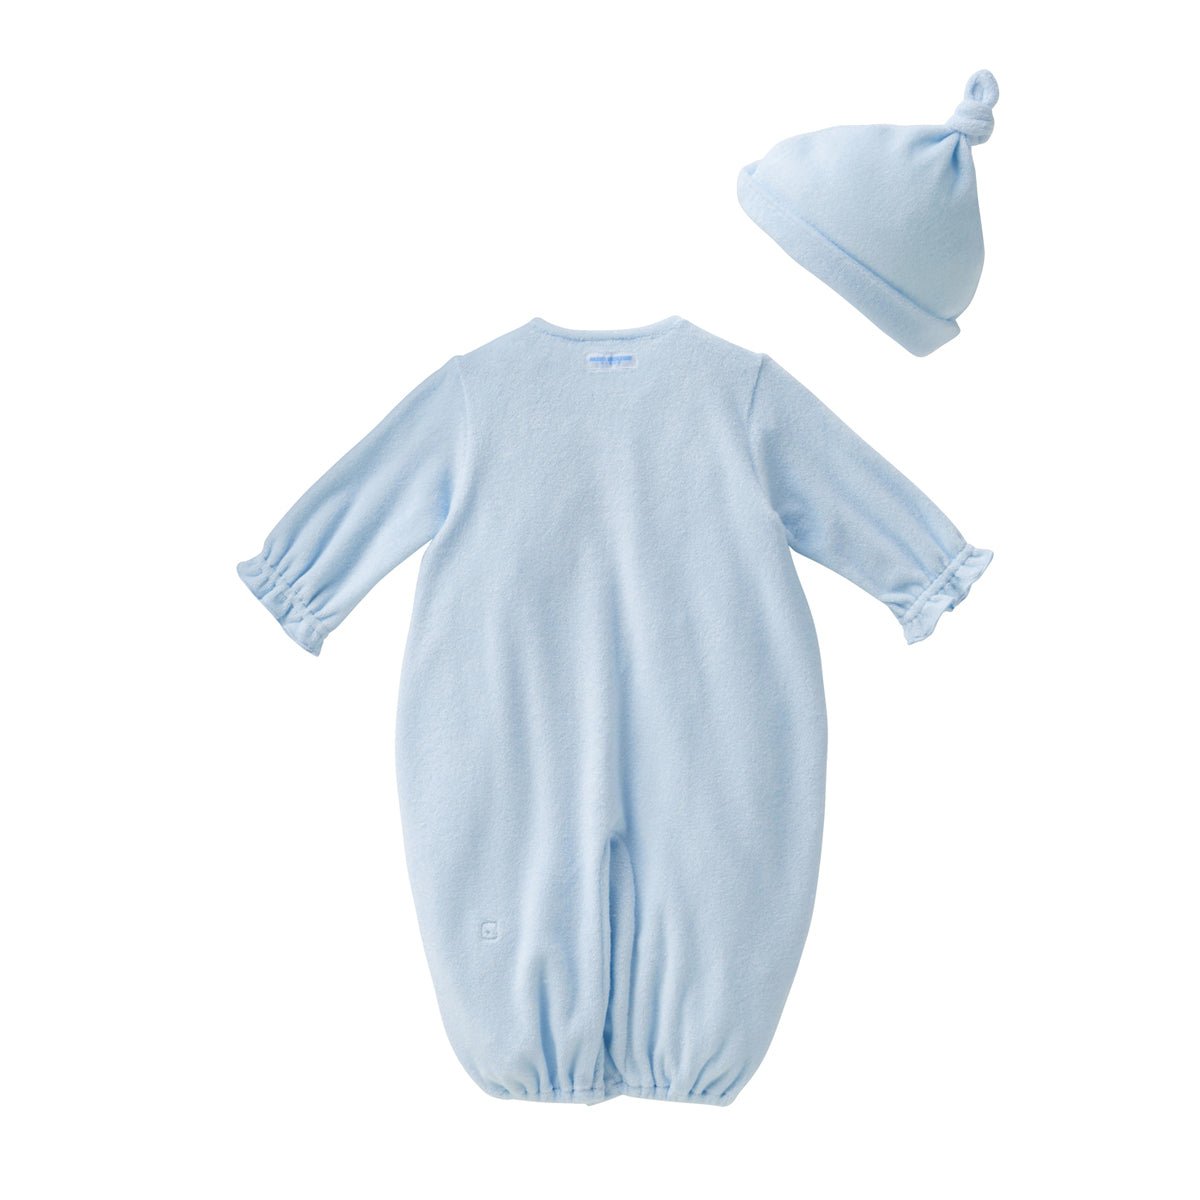 Chick & Bear Onesie with Hat - 40-2632-508-15-50